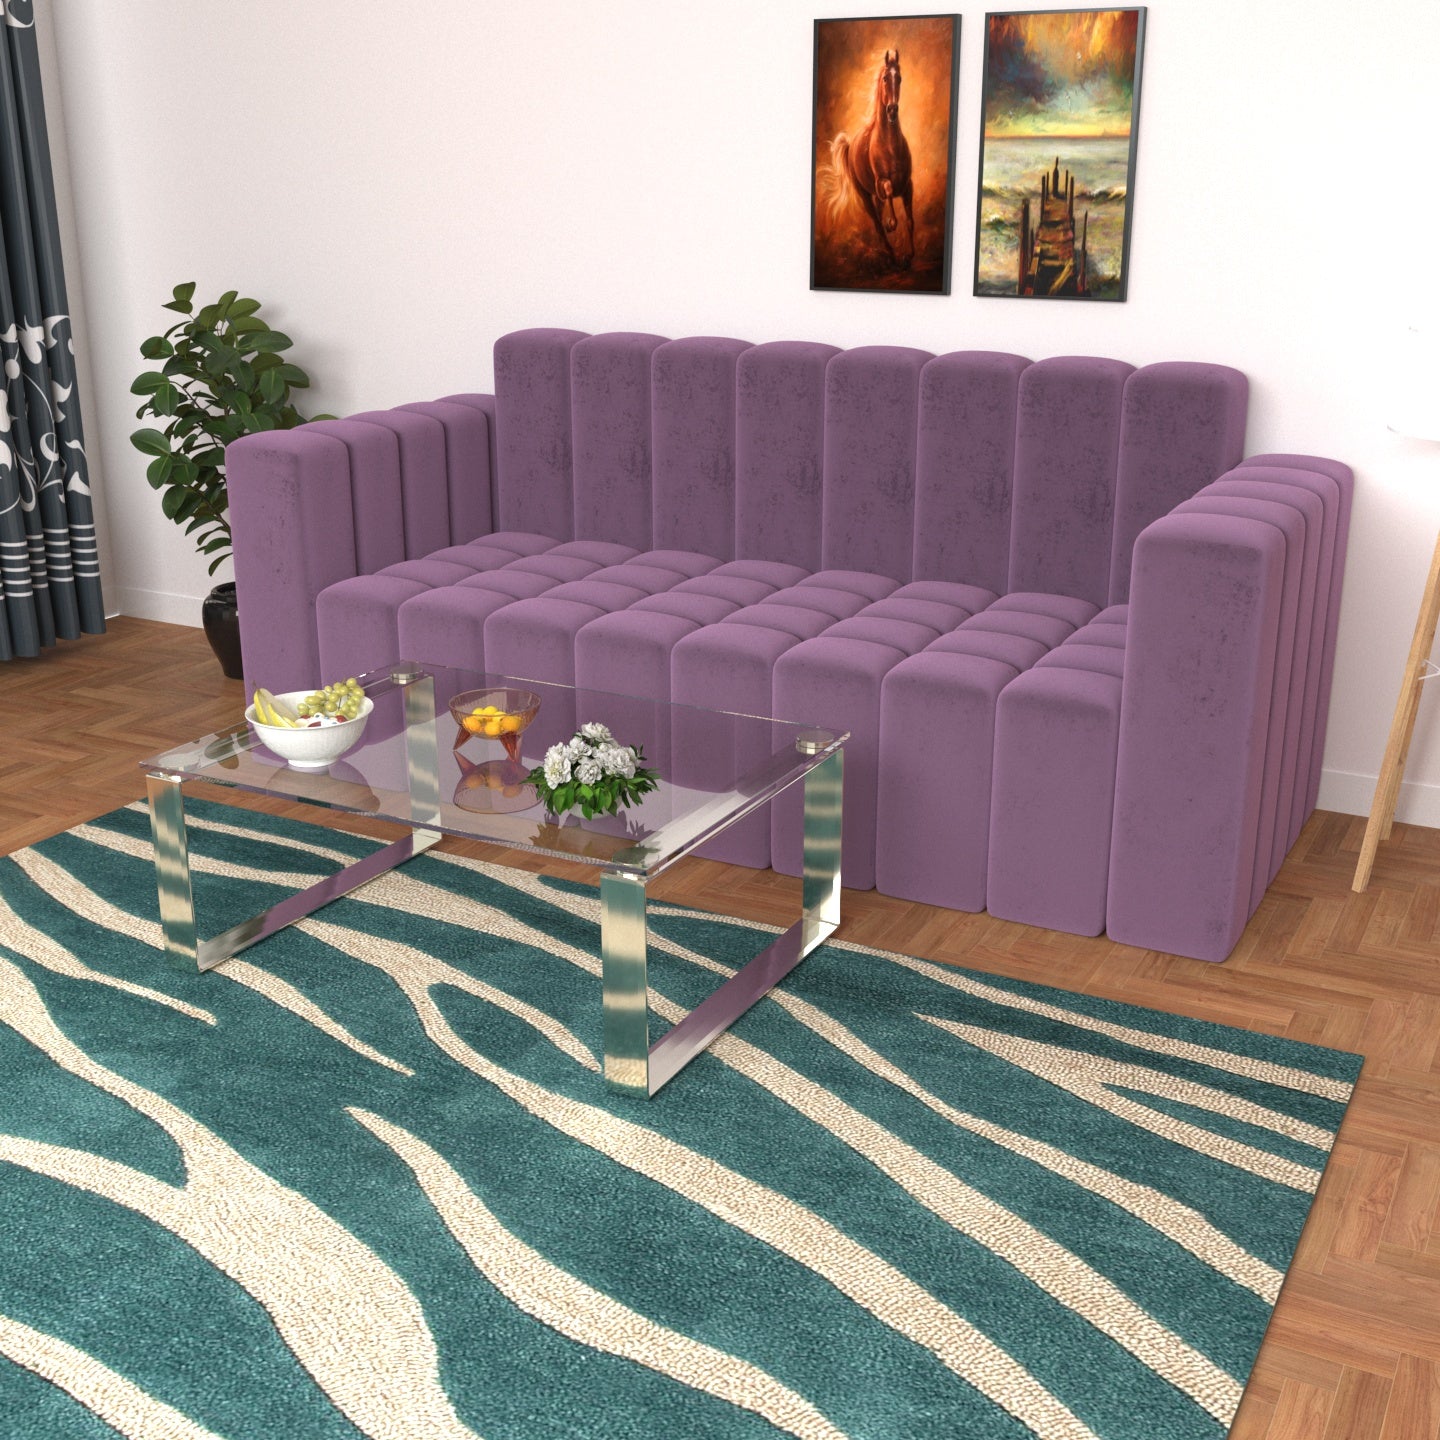 Strip Style Dark Violet Shaded Wooden 3 Seater Sofa Sofa